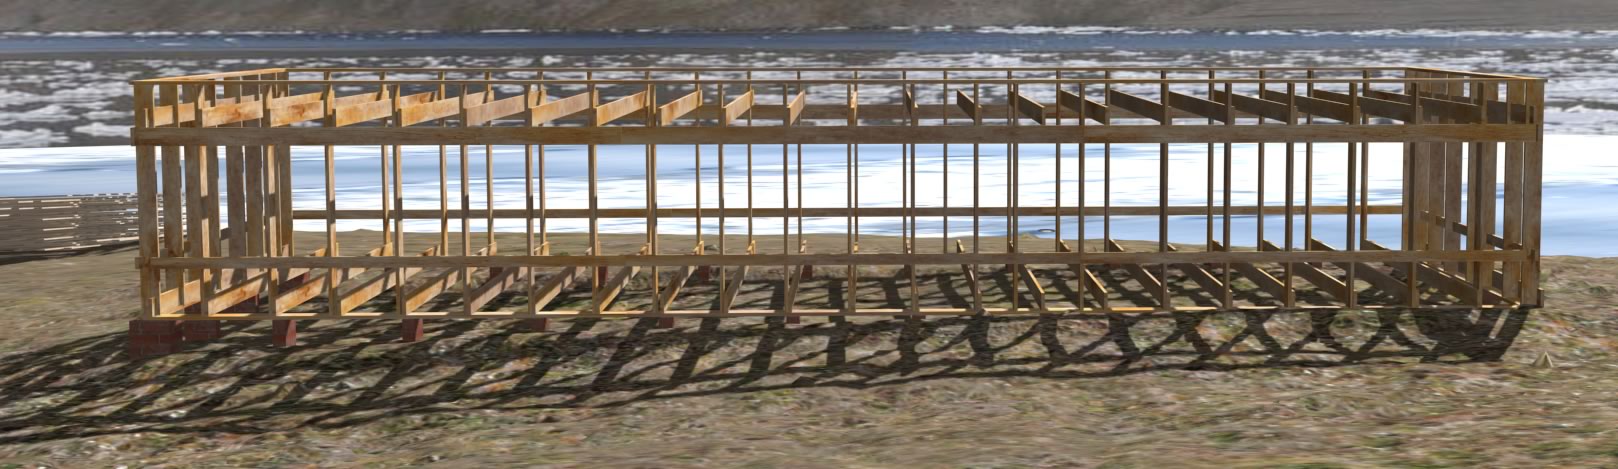 Virtual reconstruction of the same historic photo showing the house frame fully erected. Discovery Harbor is visible in the background.